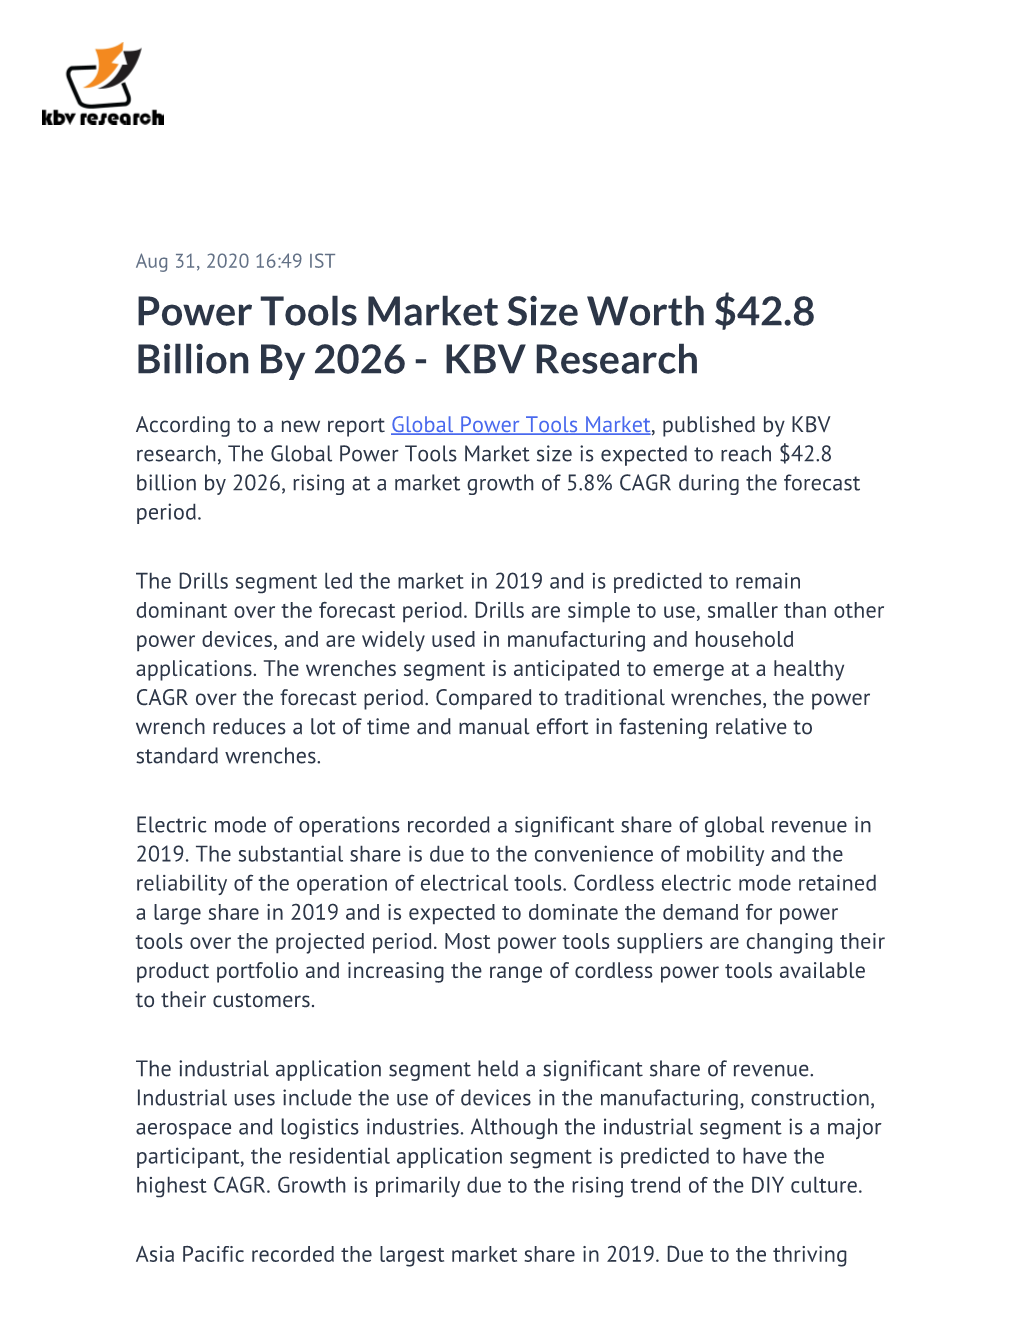 Power Tools Market Size Worth $42.8 Billion by 2026 - KBV Research